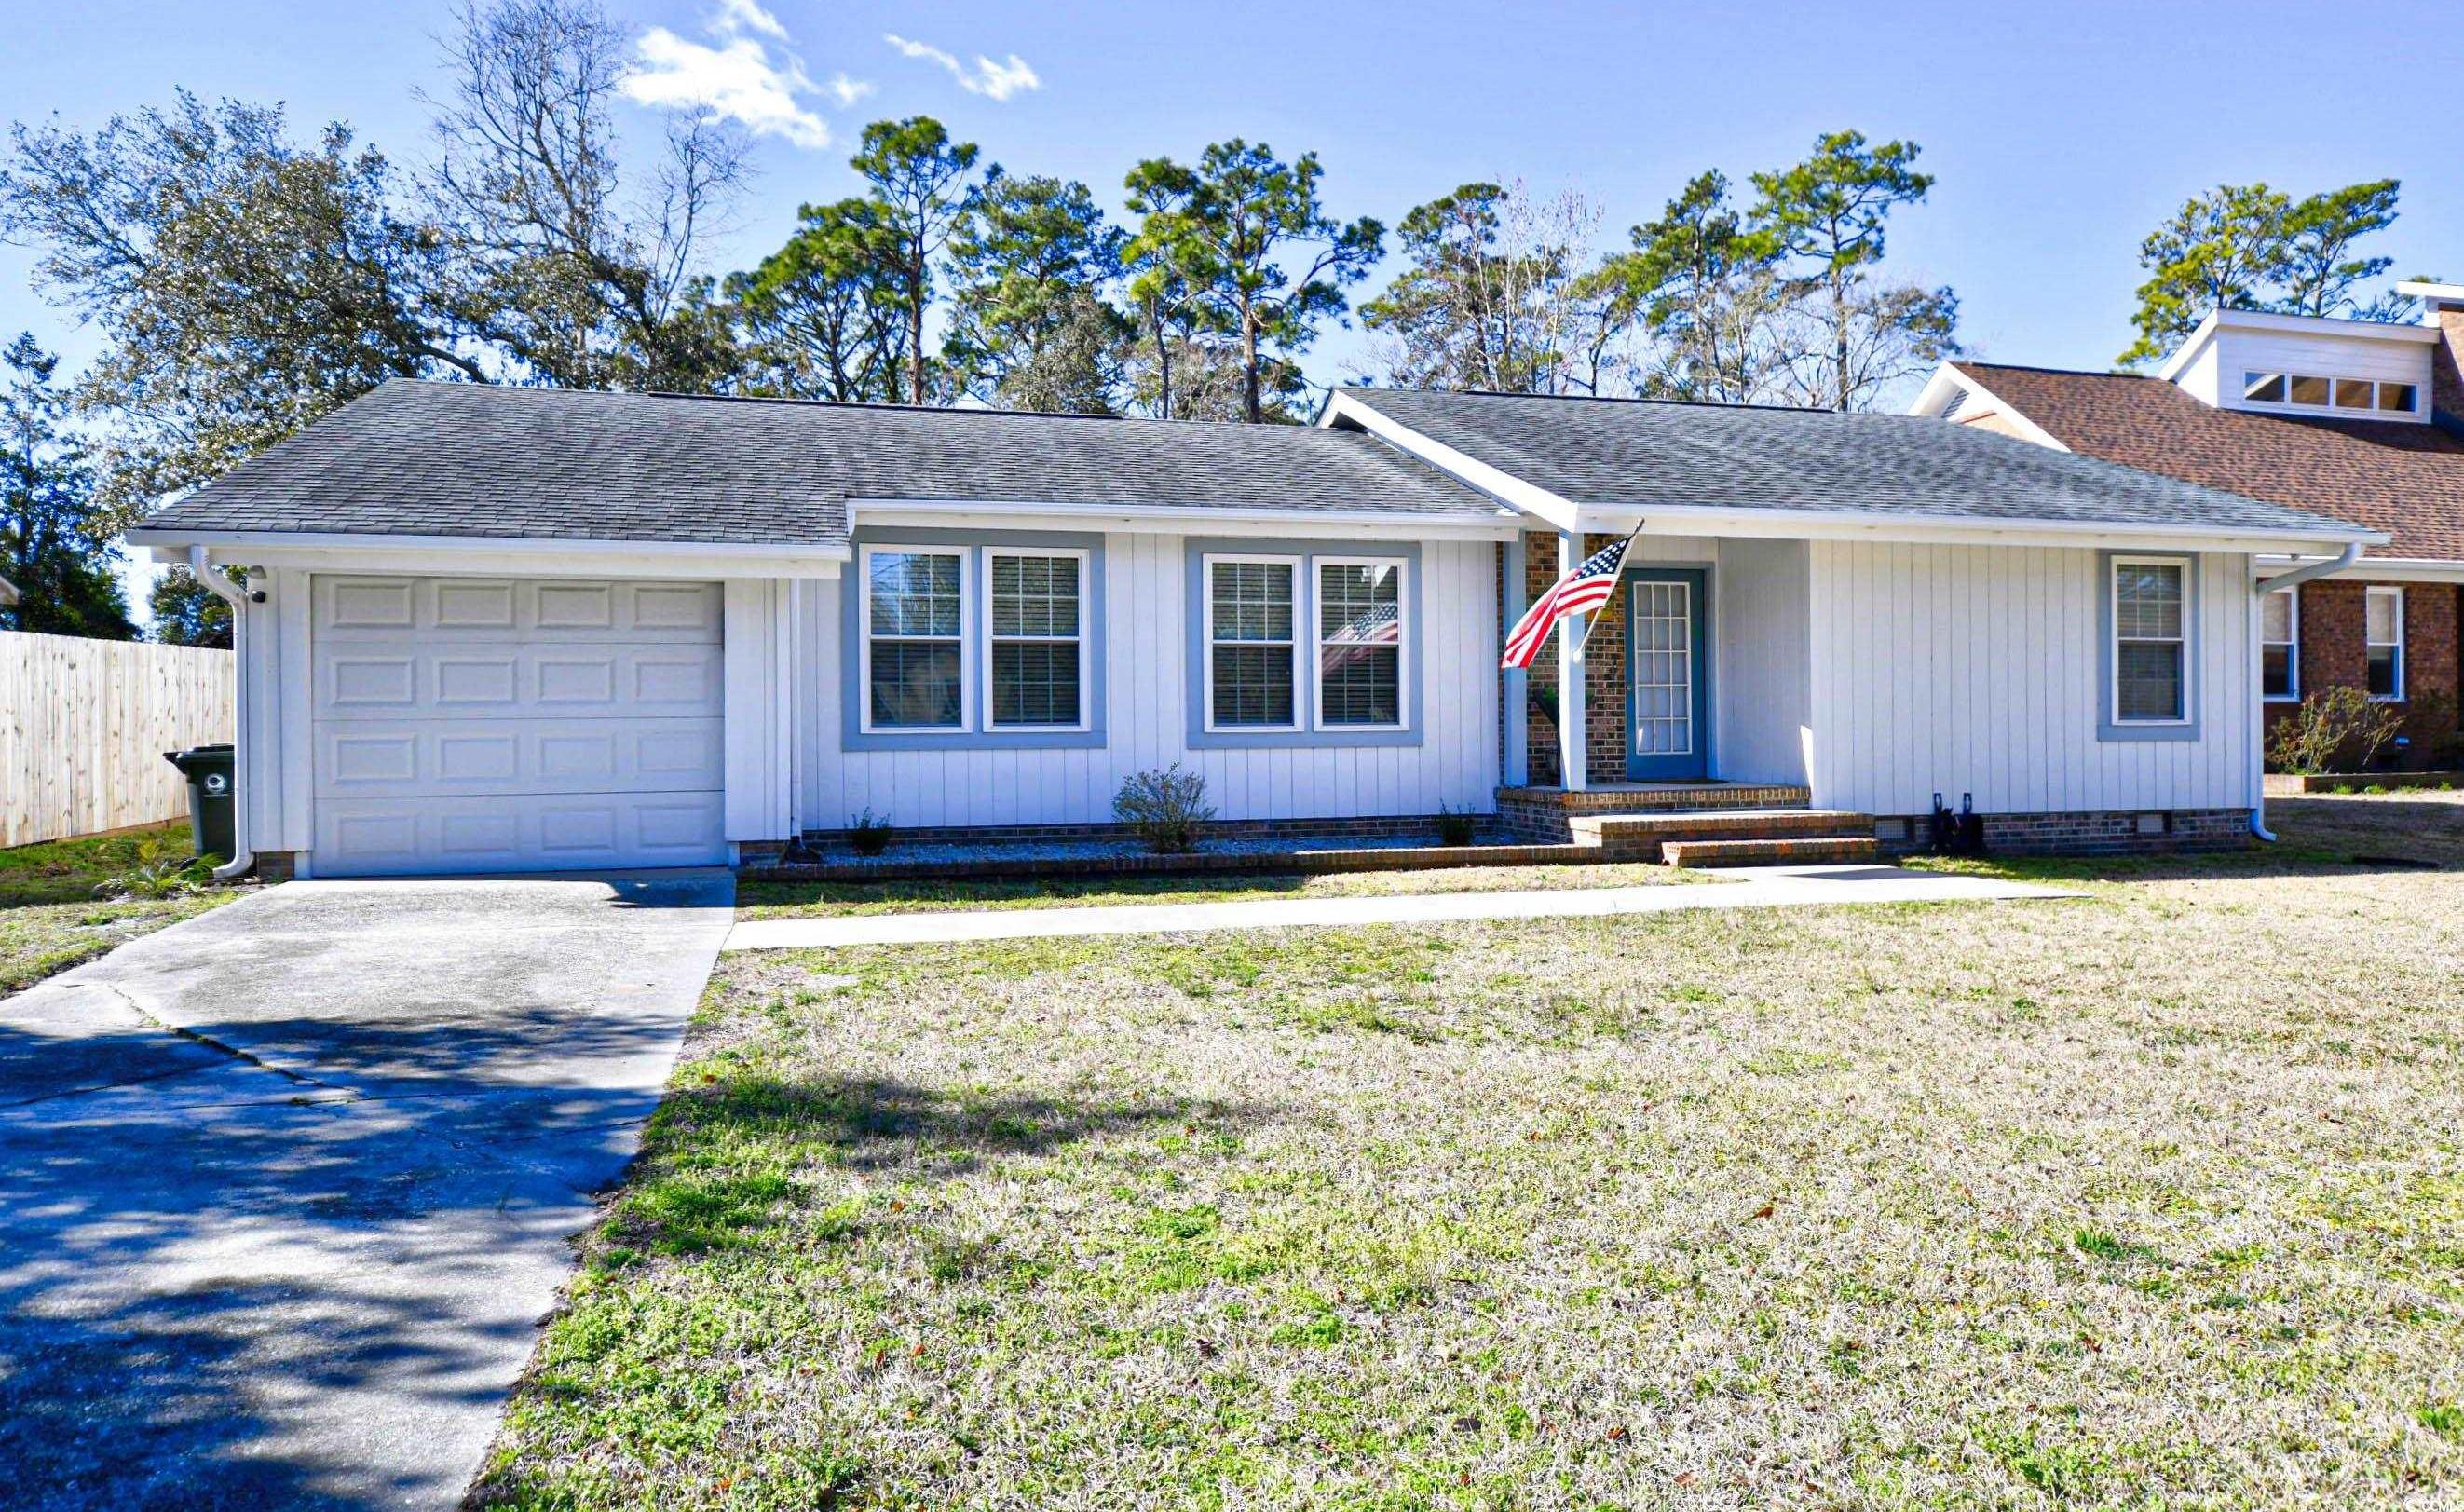 Photo one of 605 63Rd Ave. N Myrtle Beach SC 29572 | MLS 2404213